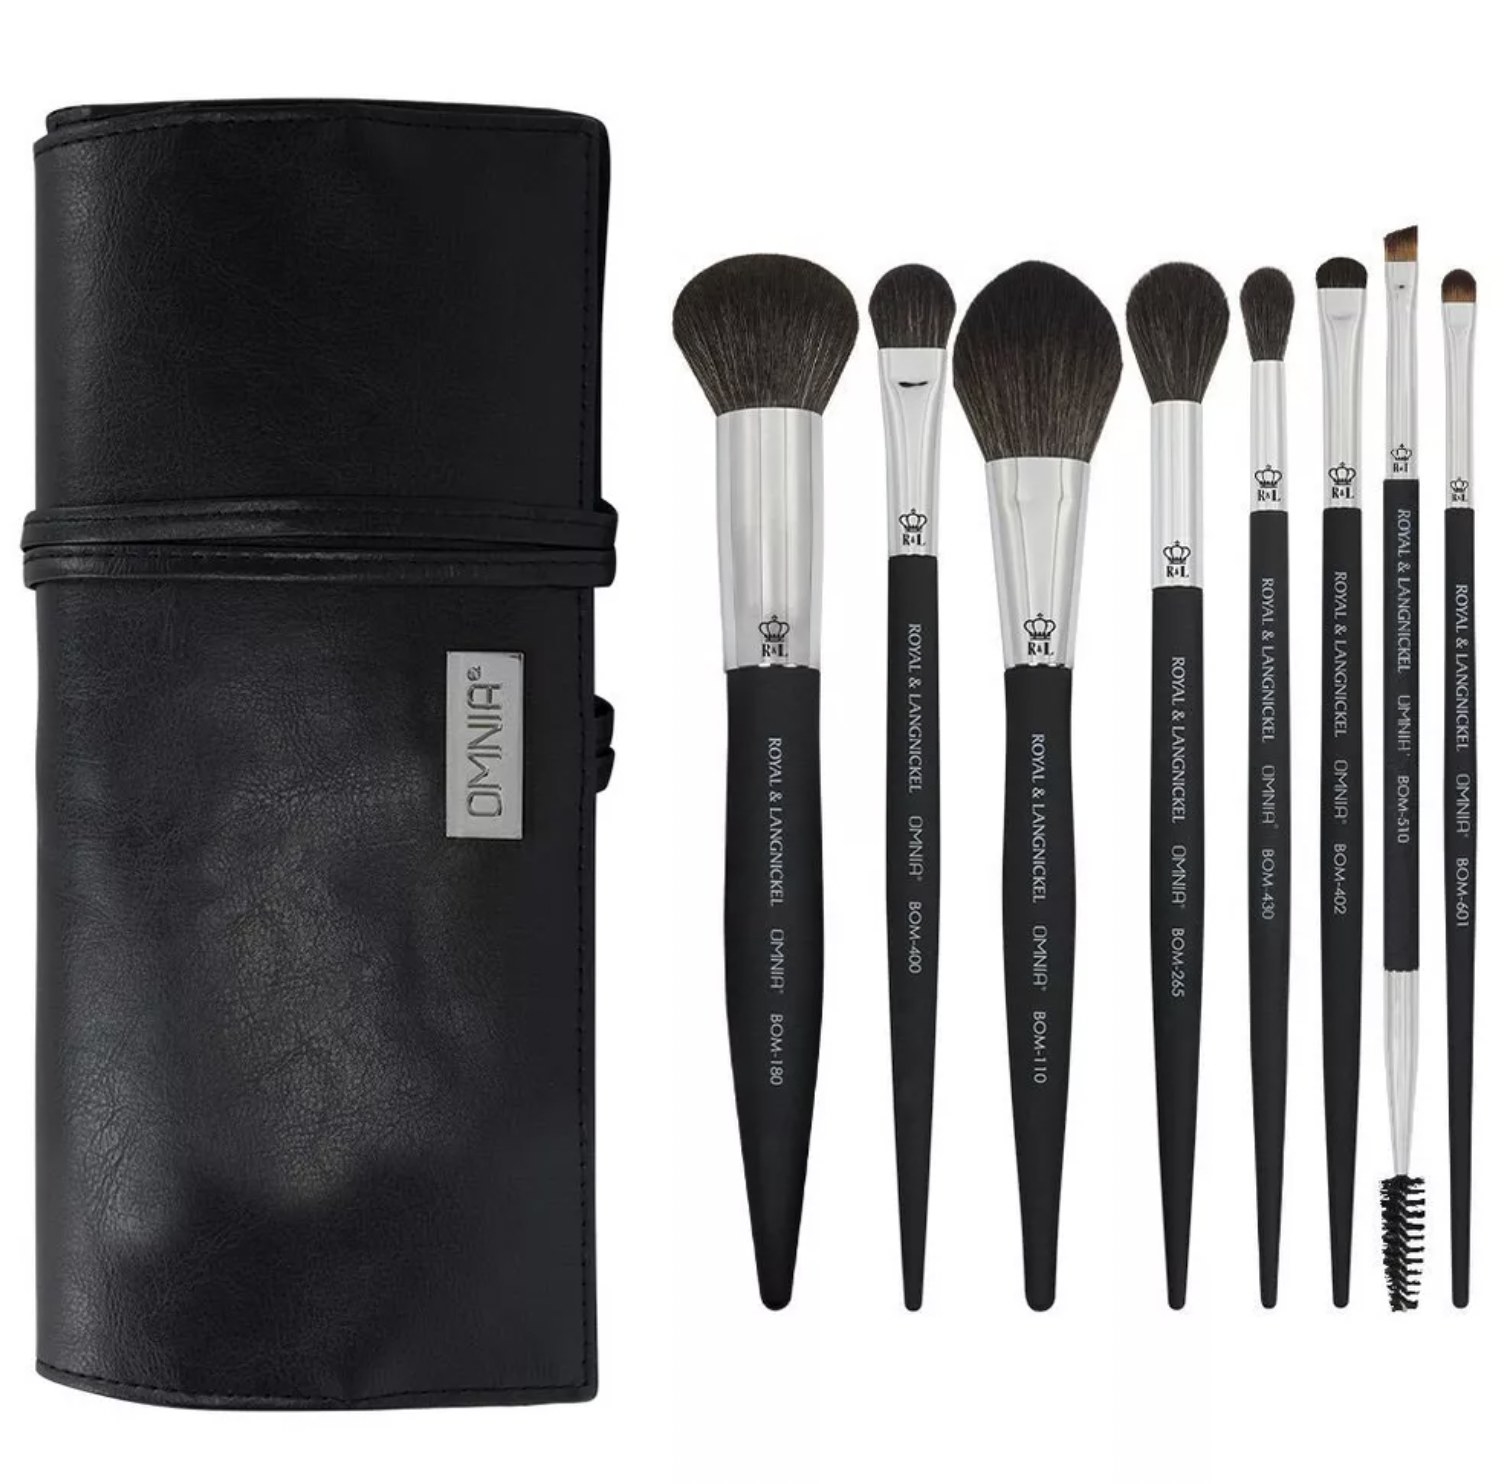 The set of brushes and wrap case